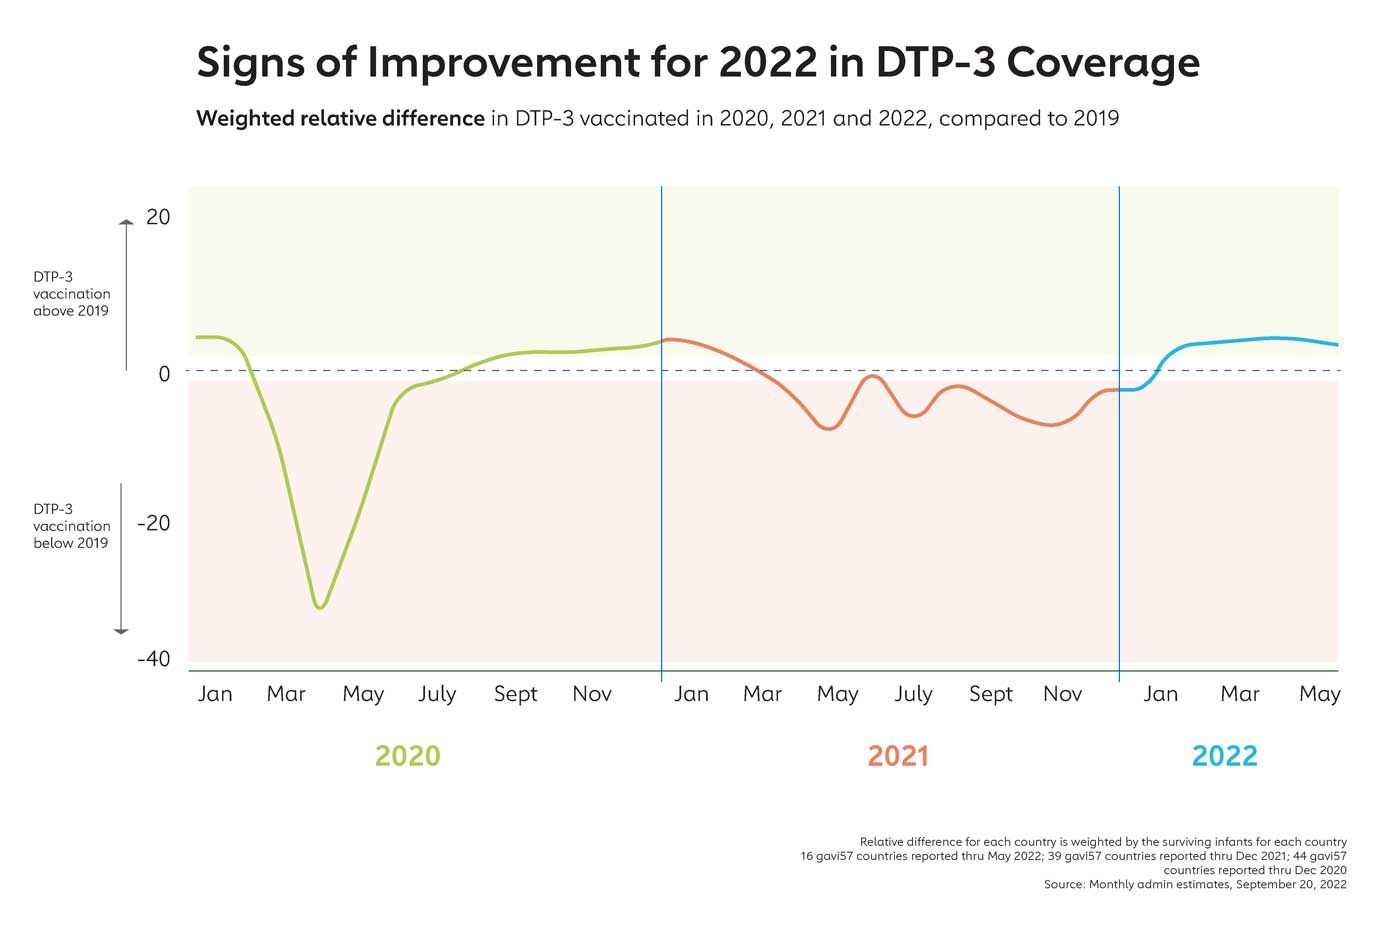 Weighted relative difference in DTP-3 vaccinated in 2020, 2021 and 2022, compared to 2019